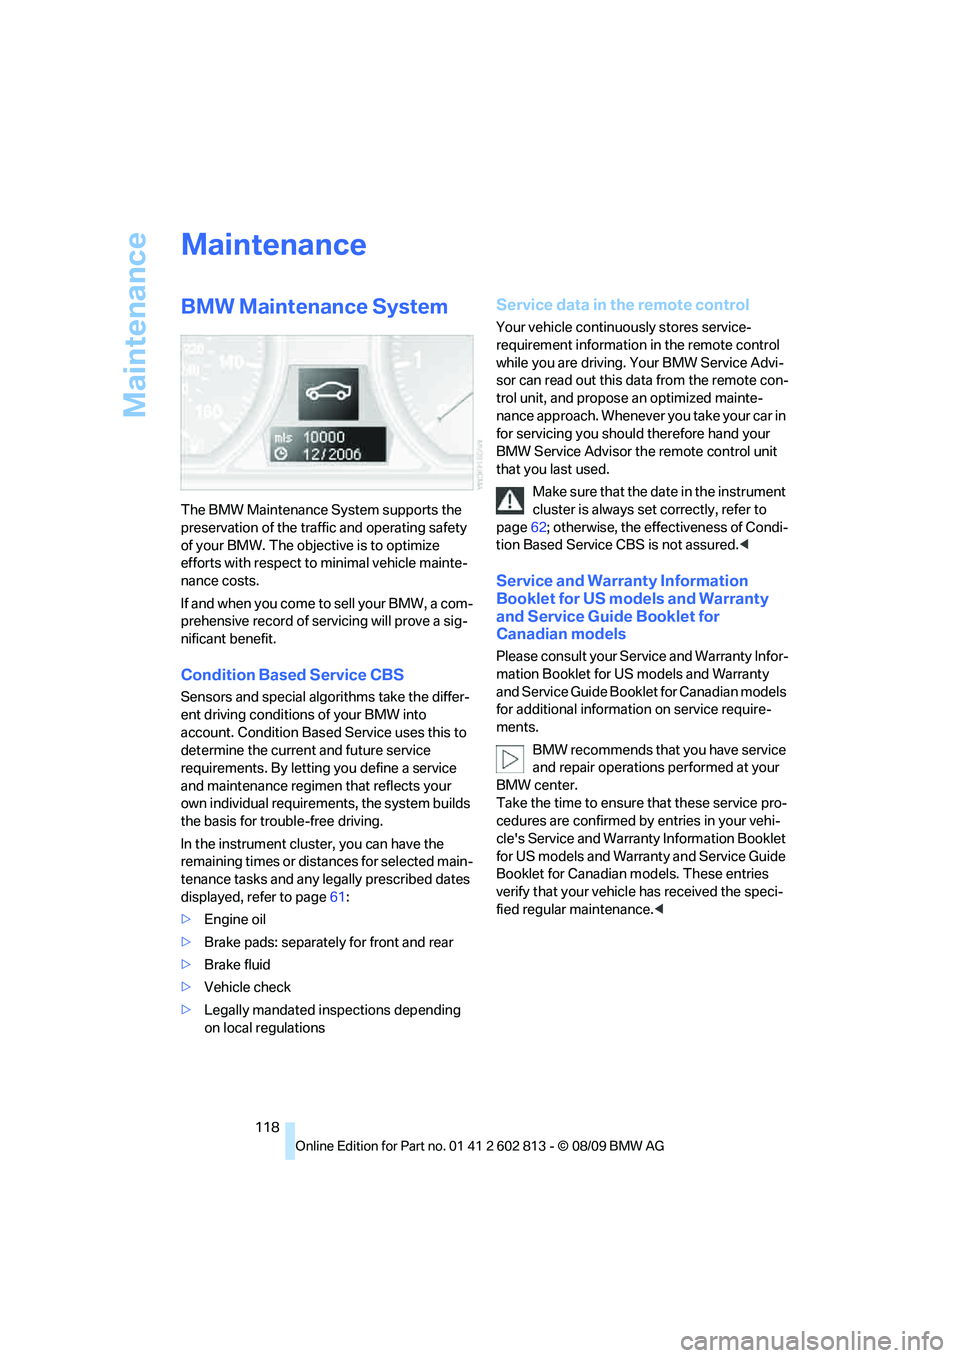 BMW 1 SERIES 2010  Owners Manual Maintenance
118
Maintenance
BMW Maintenance System
The BMW Maintenance System supports the 
preservation of the traffic and operating safety 
of your BMW. The objective is to optimize 
efforts with re